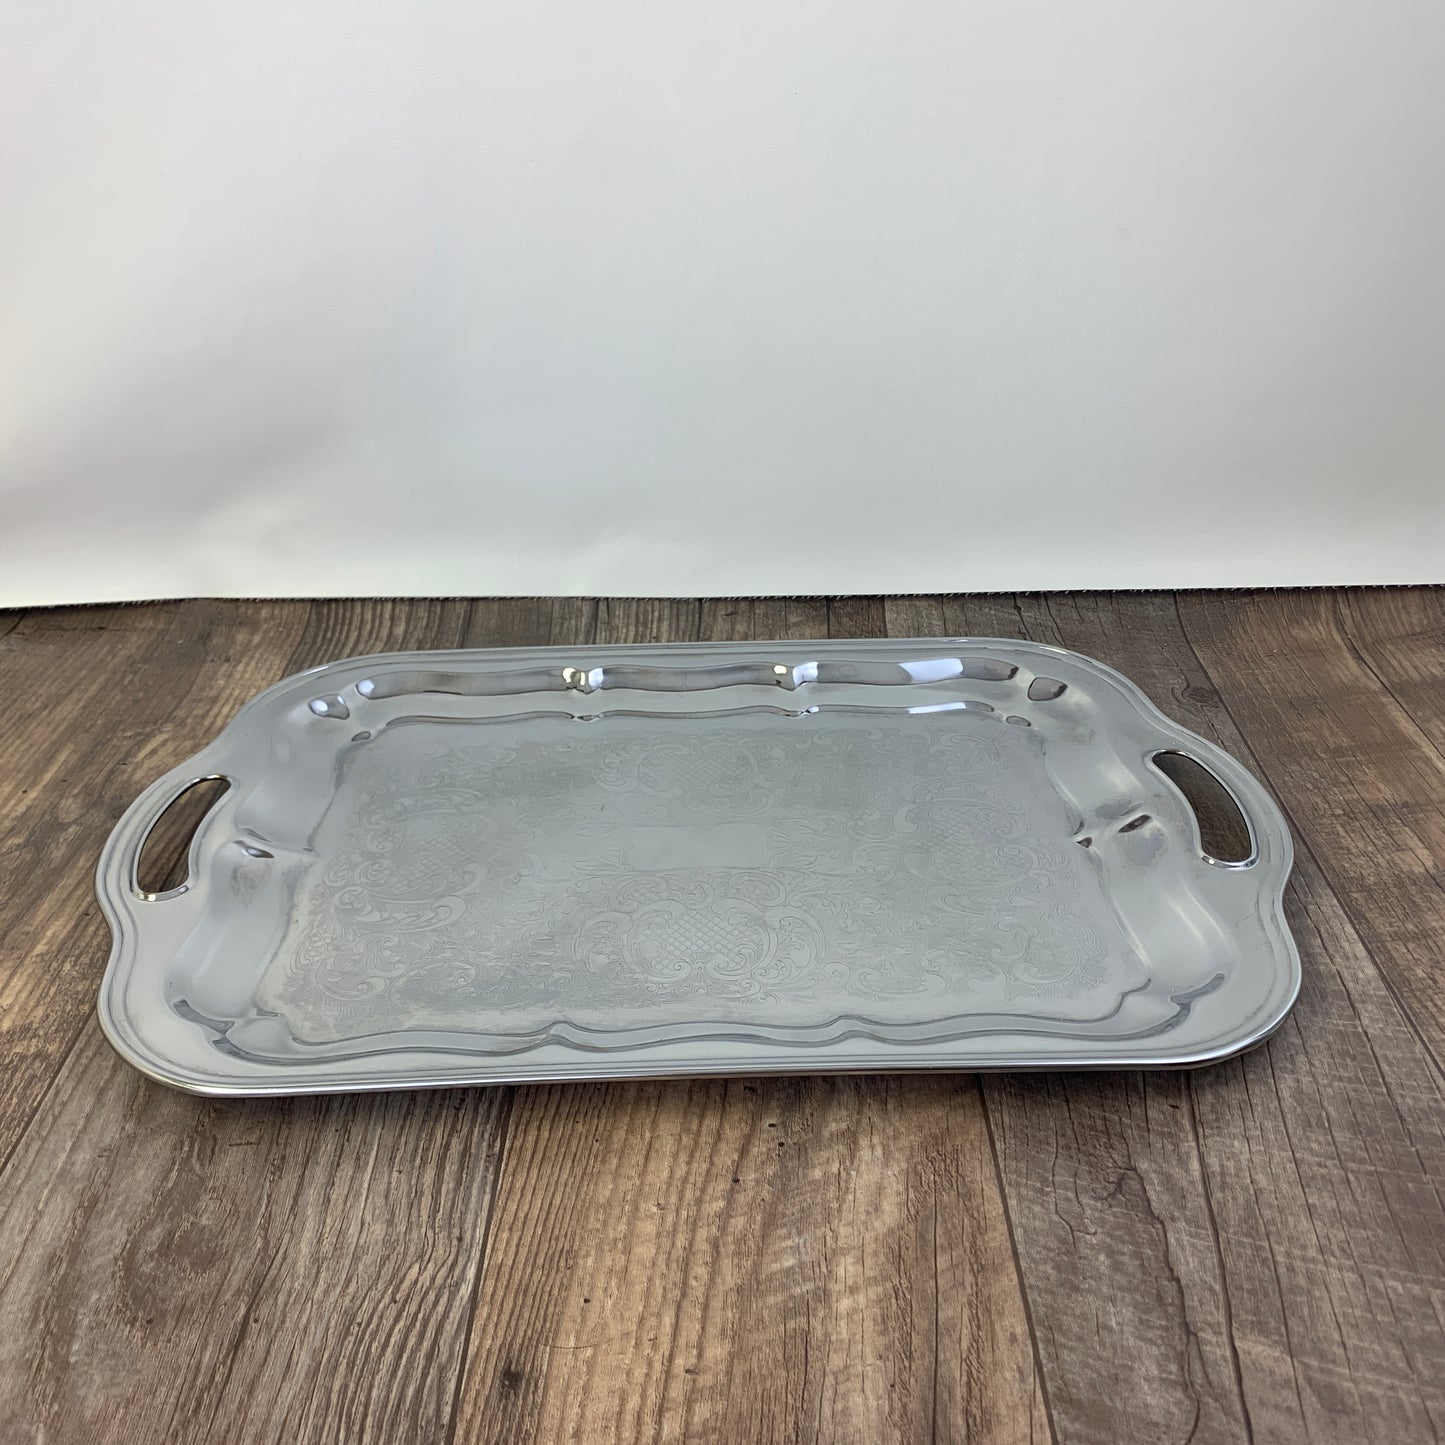 Silver Serving Tray Large Rectangle Shaped Tray with Handles, Vanity Organizer